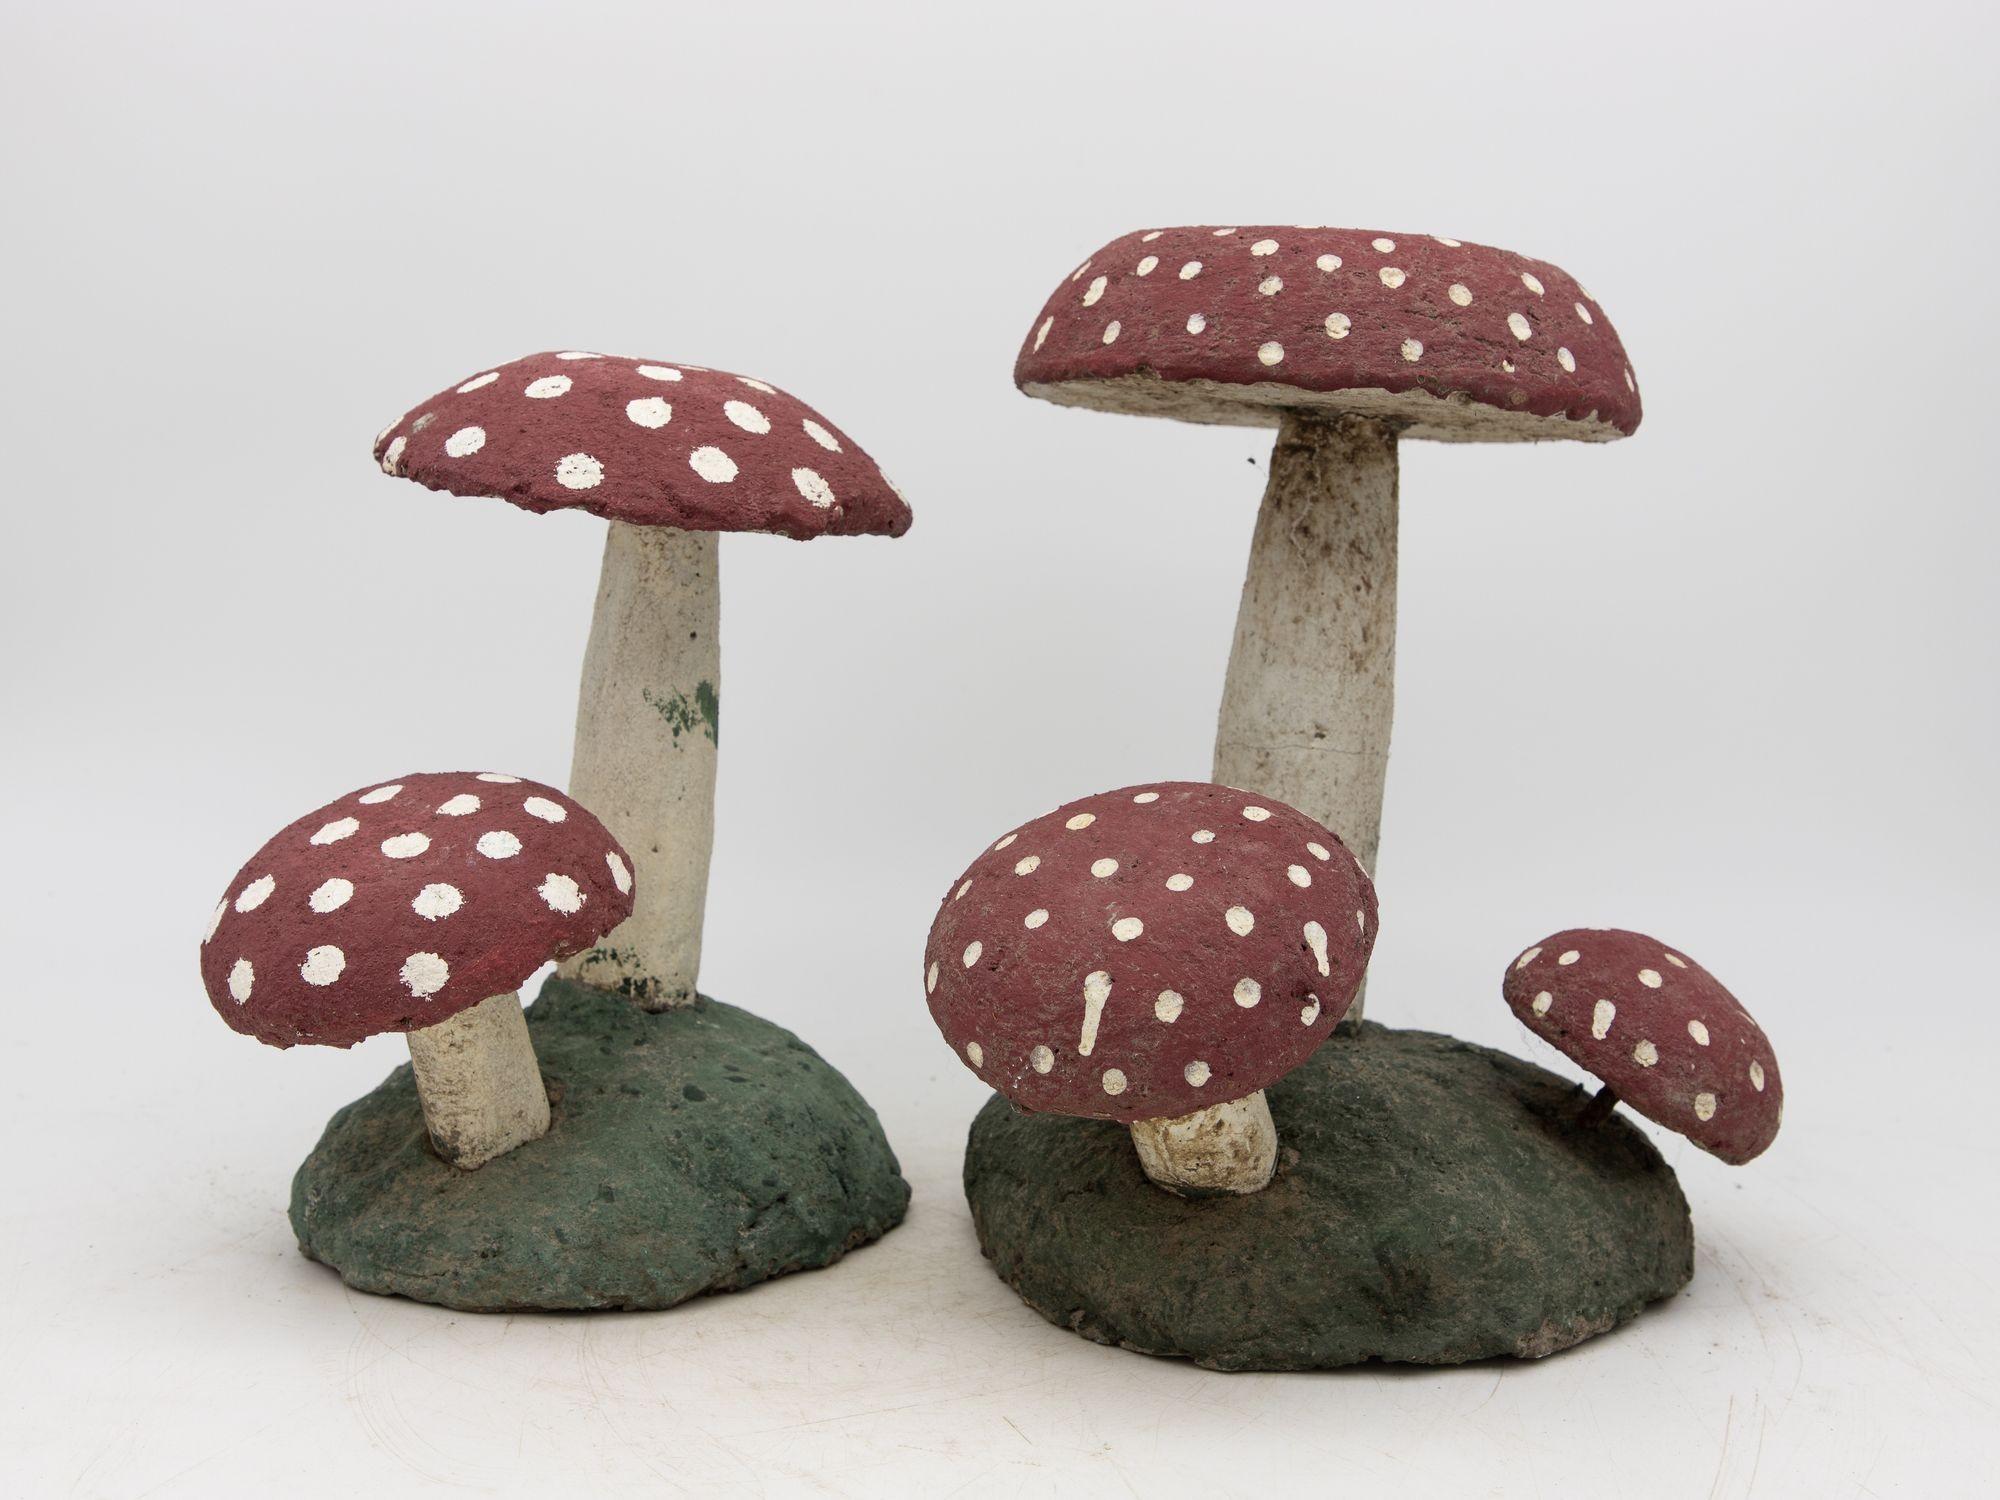 French Provincial Pair Vintage Painted Stone Toadstool Mushrooms with Red Caps For Sale